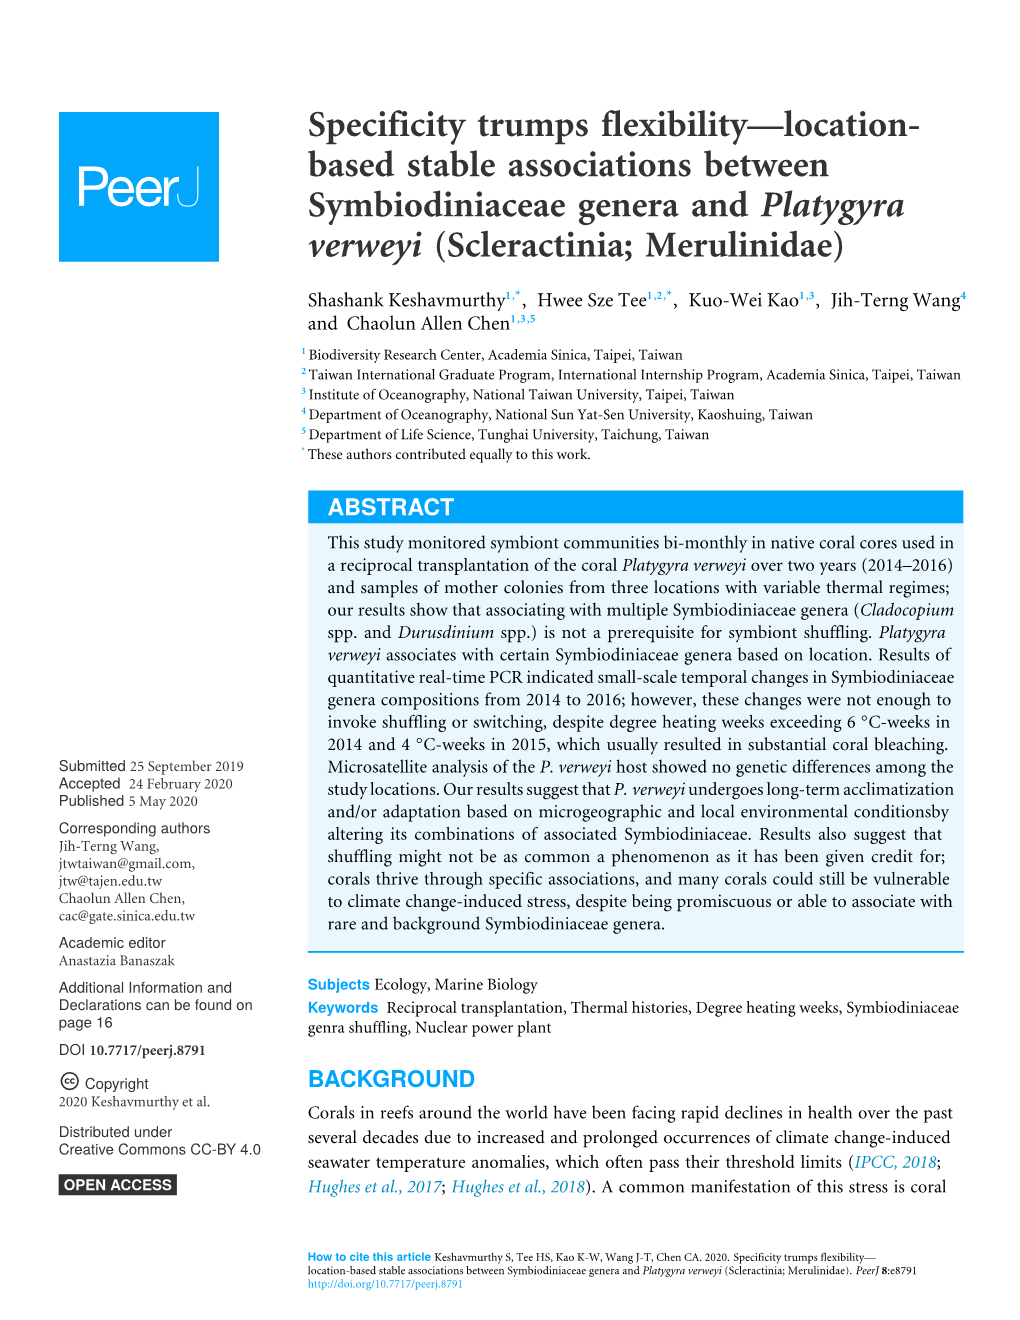 Specificity Trumps Flexibility—Location- Based Stable Associations Between Symbiodiniaceae Genera and Platygyra Verweyi (Scleractinia; Merulinidae)